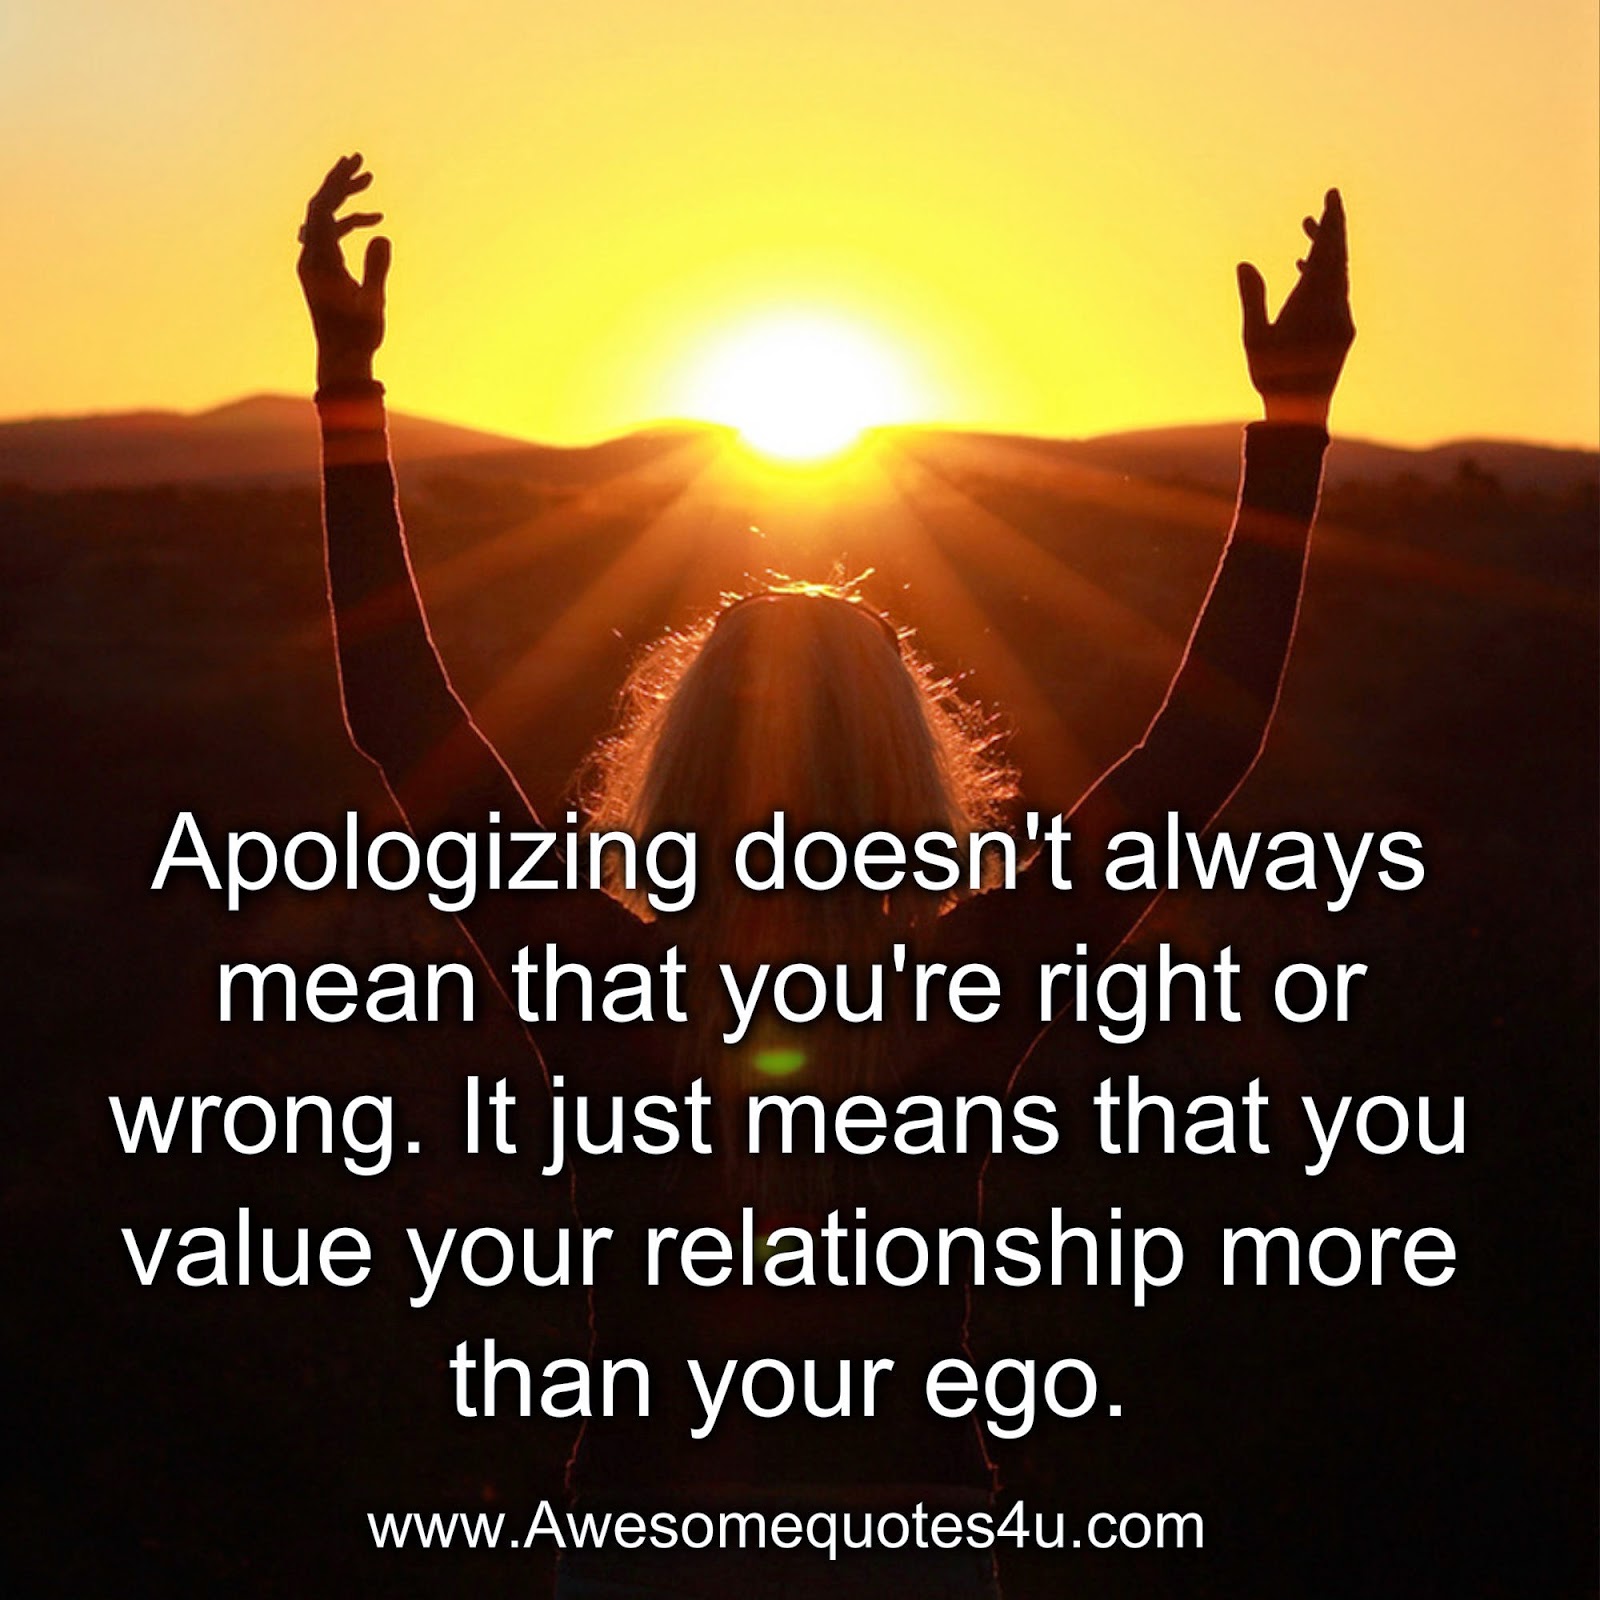 You should apologize. Apologizing. Always meaning. Apologies or apologize. Wrong to Love you.